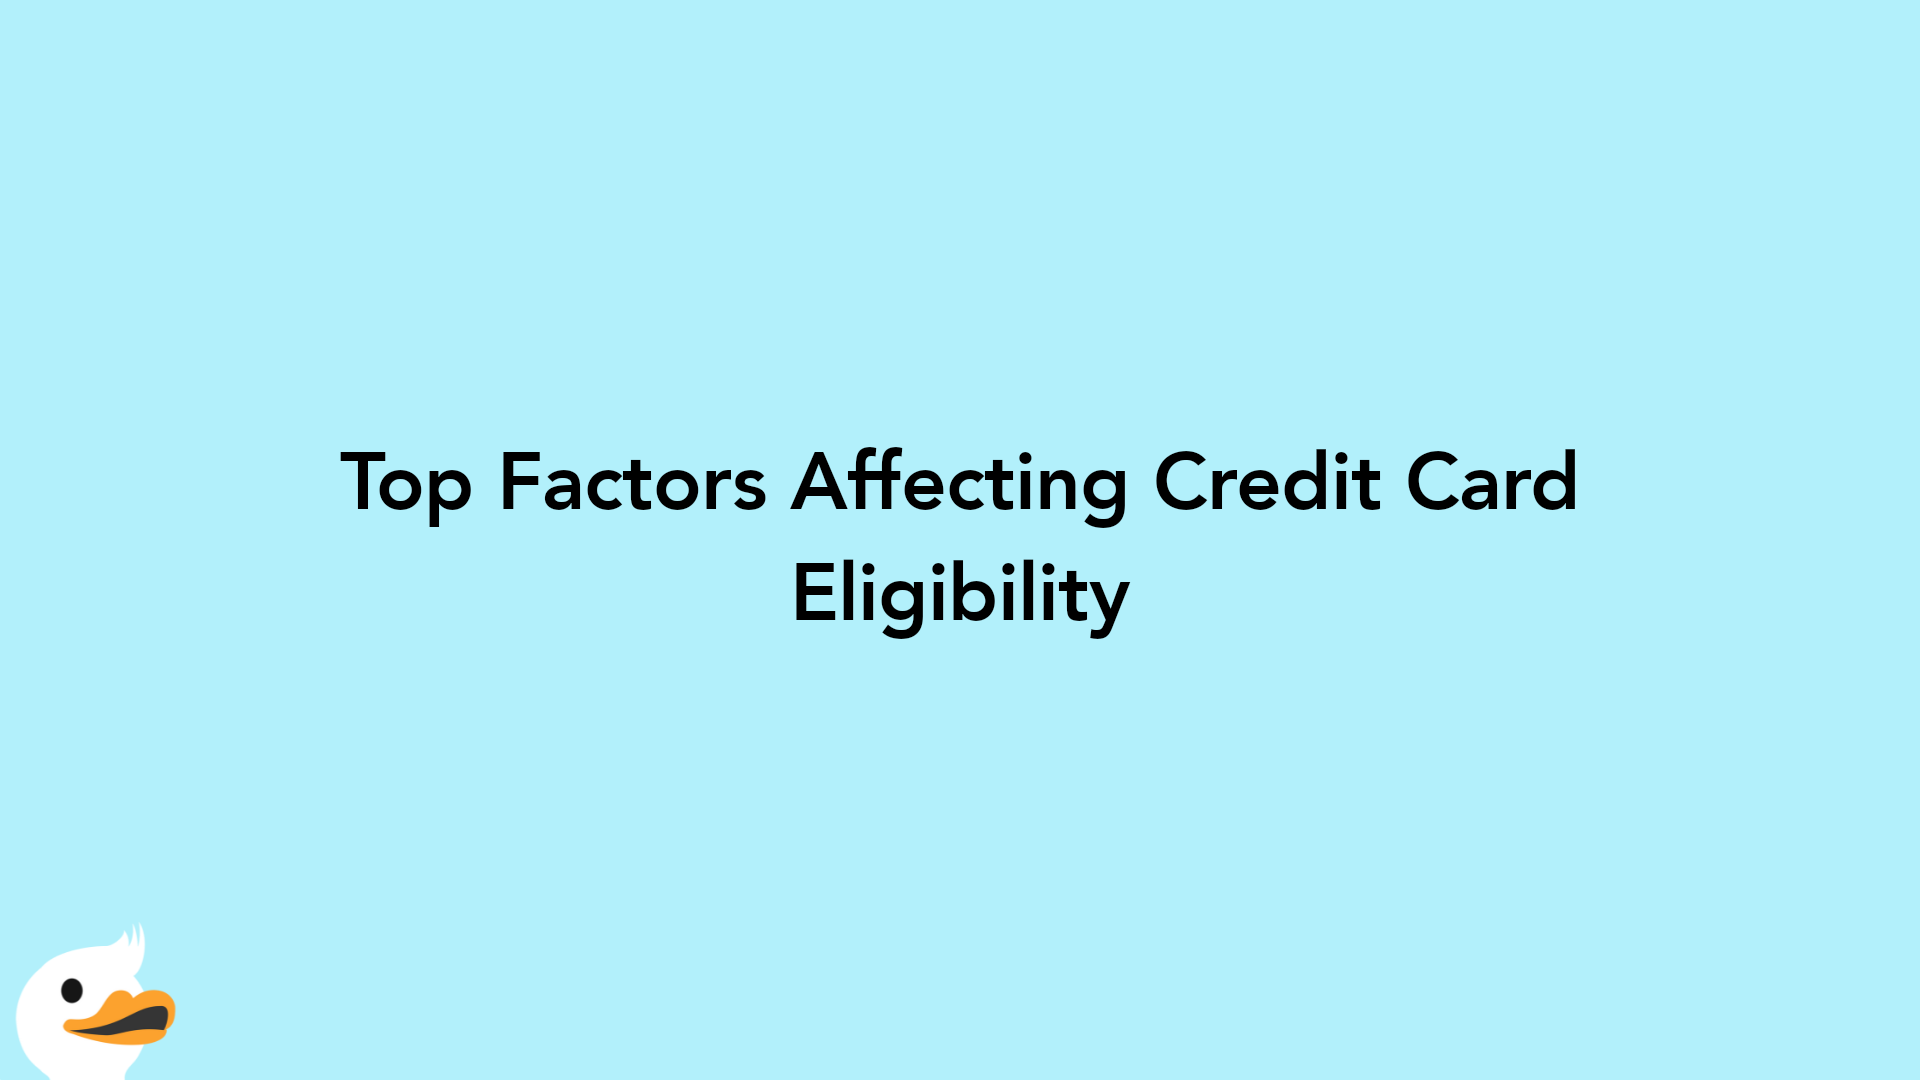 Top Factors Affecting Credit Card Eligibility